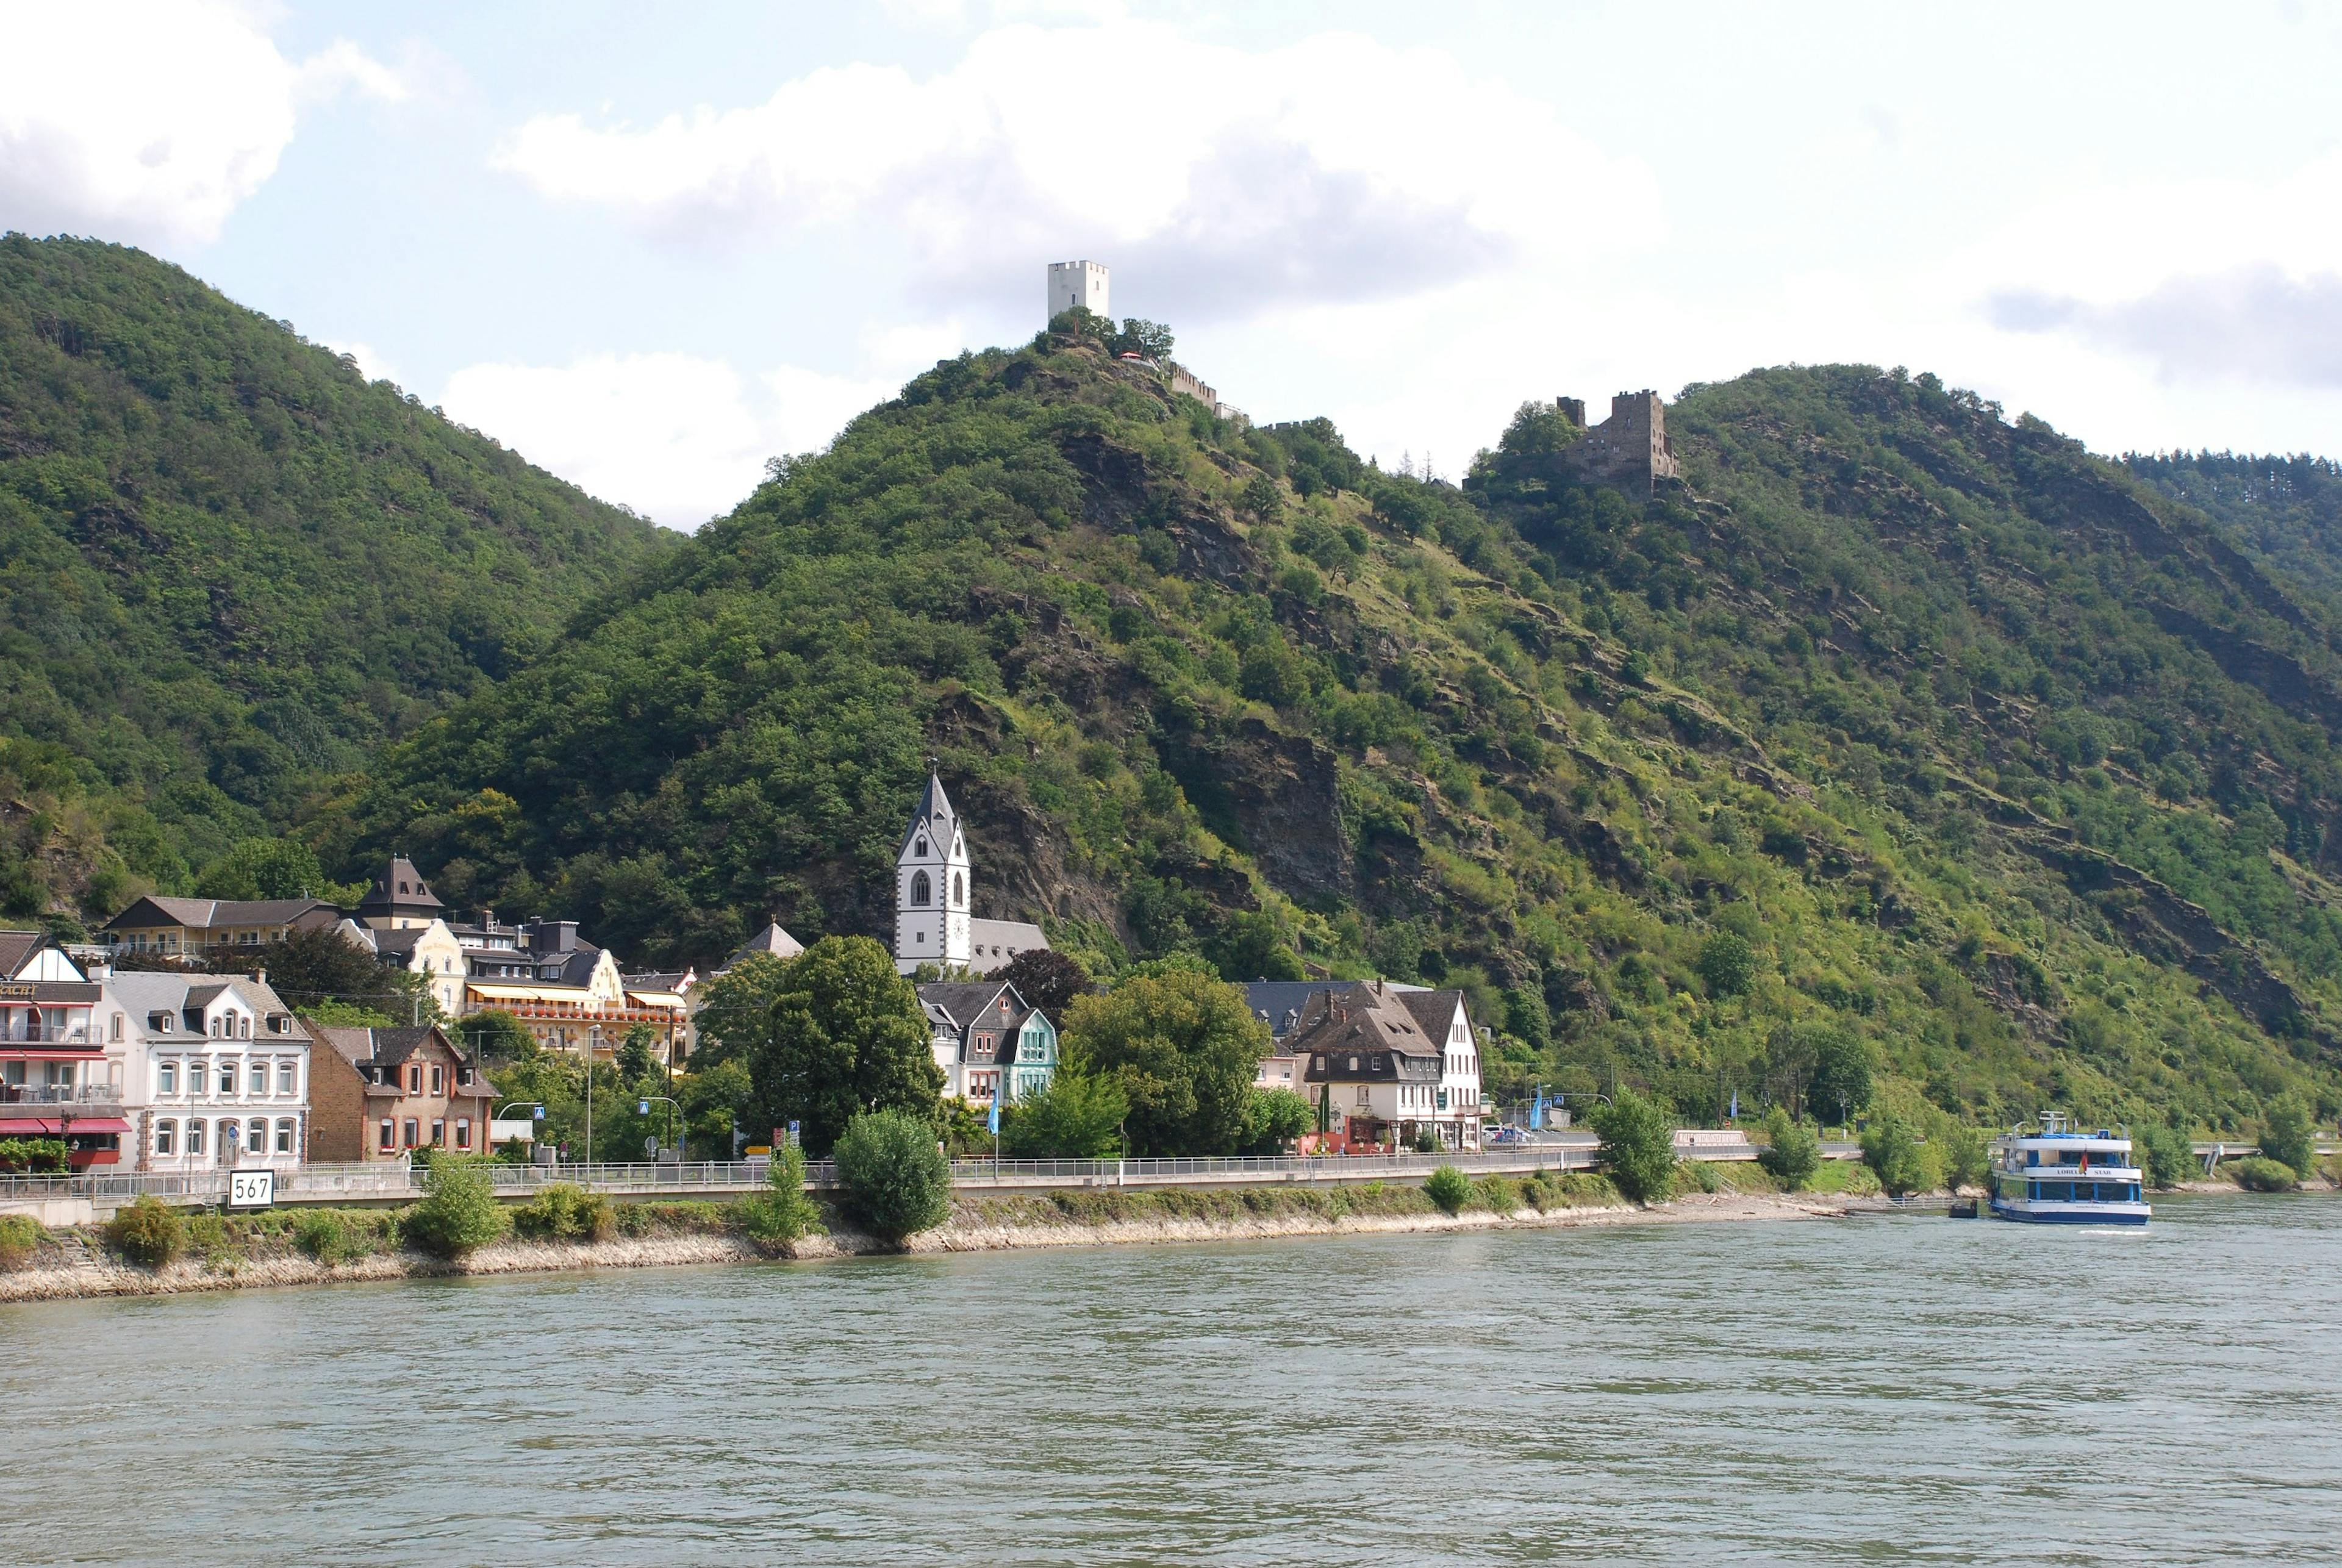 Rhine River bank with houses in Germany.